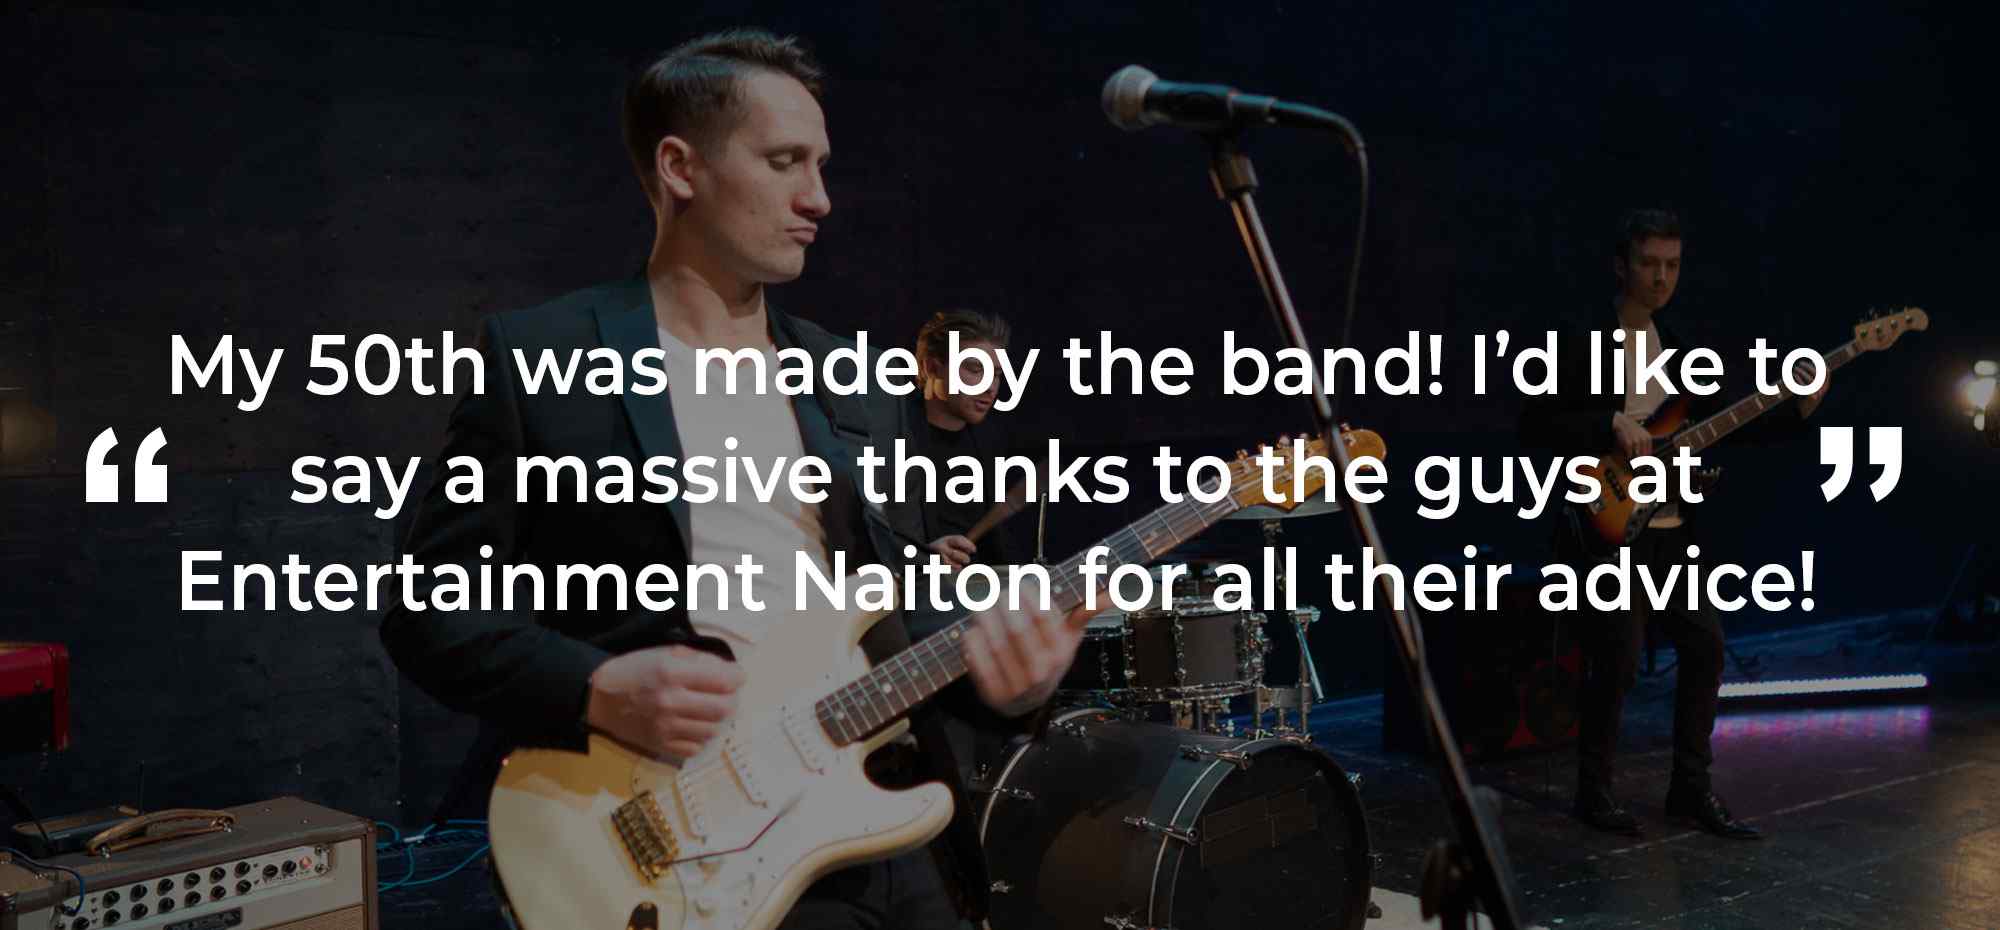 Client Review of a Party Band South Yorkshire